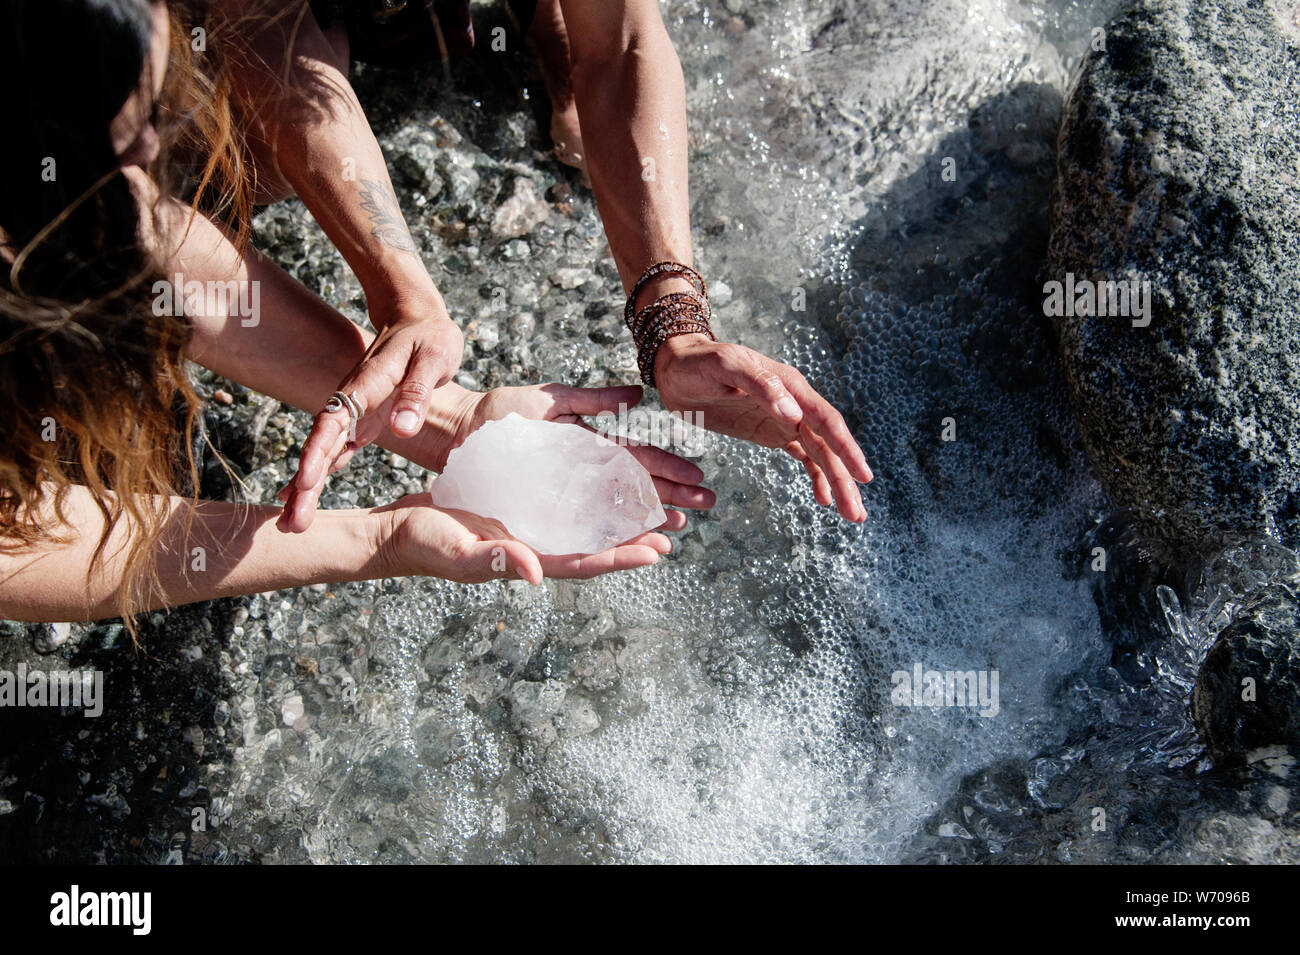 The hands of two women cleanising a big quartz crystal in a wild river. Stock Photo